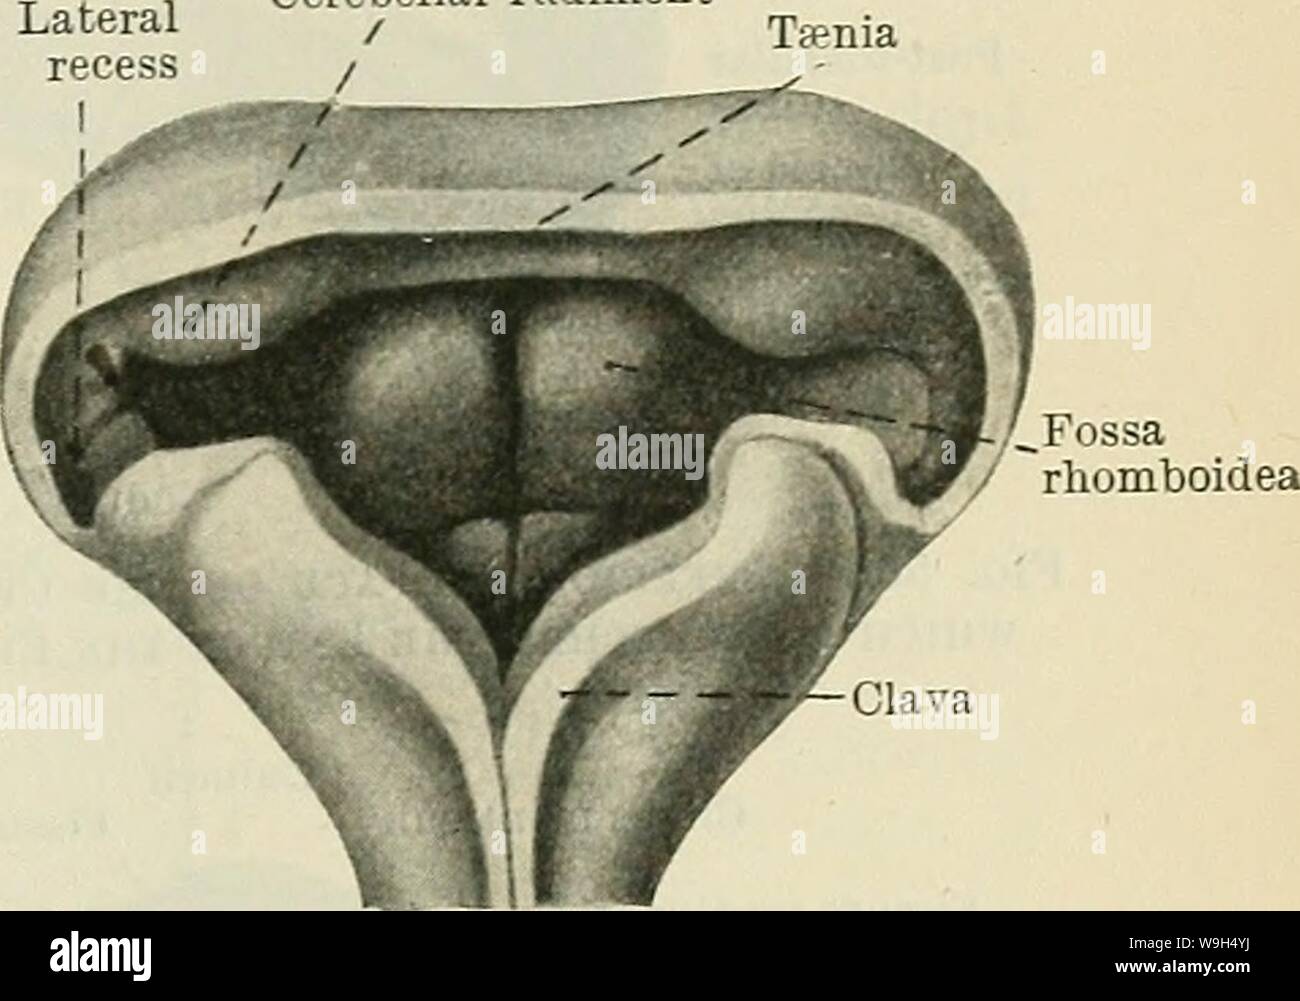 Archive image from page 604 of Cunningham's Text-book of anatomy (1914). Cunningham's Text-book of anatomy  cunninghamstextb00cunn Year: 1914 ( THE CEEEBELLUM. 571 Cerebellar rudiment    The accentuation of the pontine flexure at this stage brings the two cerebellar rudiments into the transverse direction and in line one with the other and the roof-plate, which is now being thickened by immigrant neuroblasts from the medial extremities of the two cerebellar rudiments. When one organ is thus formed by the union in the roof-plate of the originally separate rudiments, it presents the form of a du Stock Photo